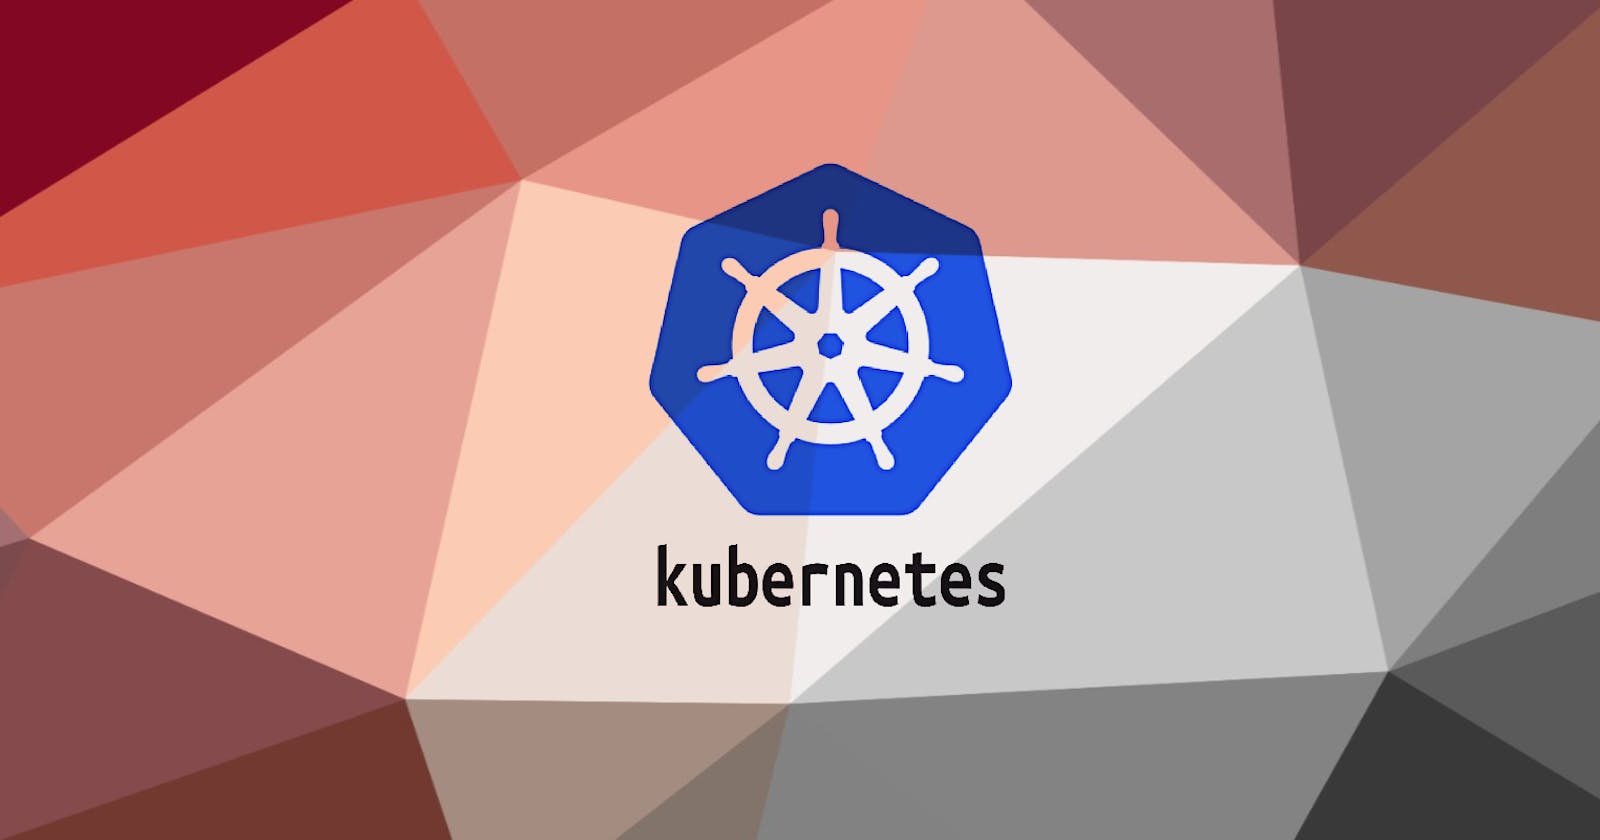 Demystifying Kubernetes: A Closer Look at Pods, Namespaces, Deployments, Services, Secrets, and ConfigMaps